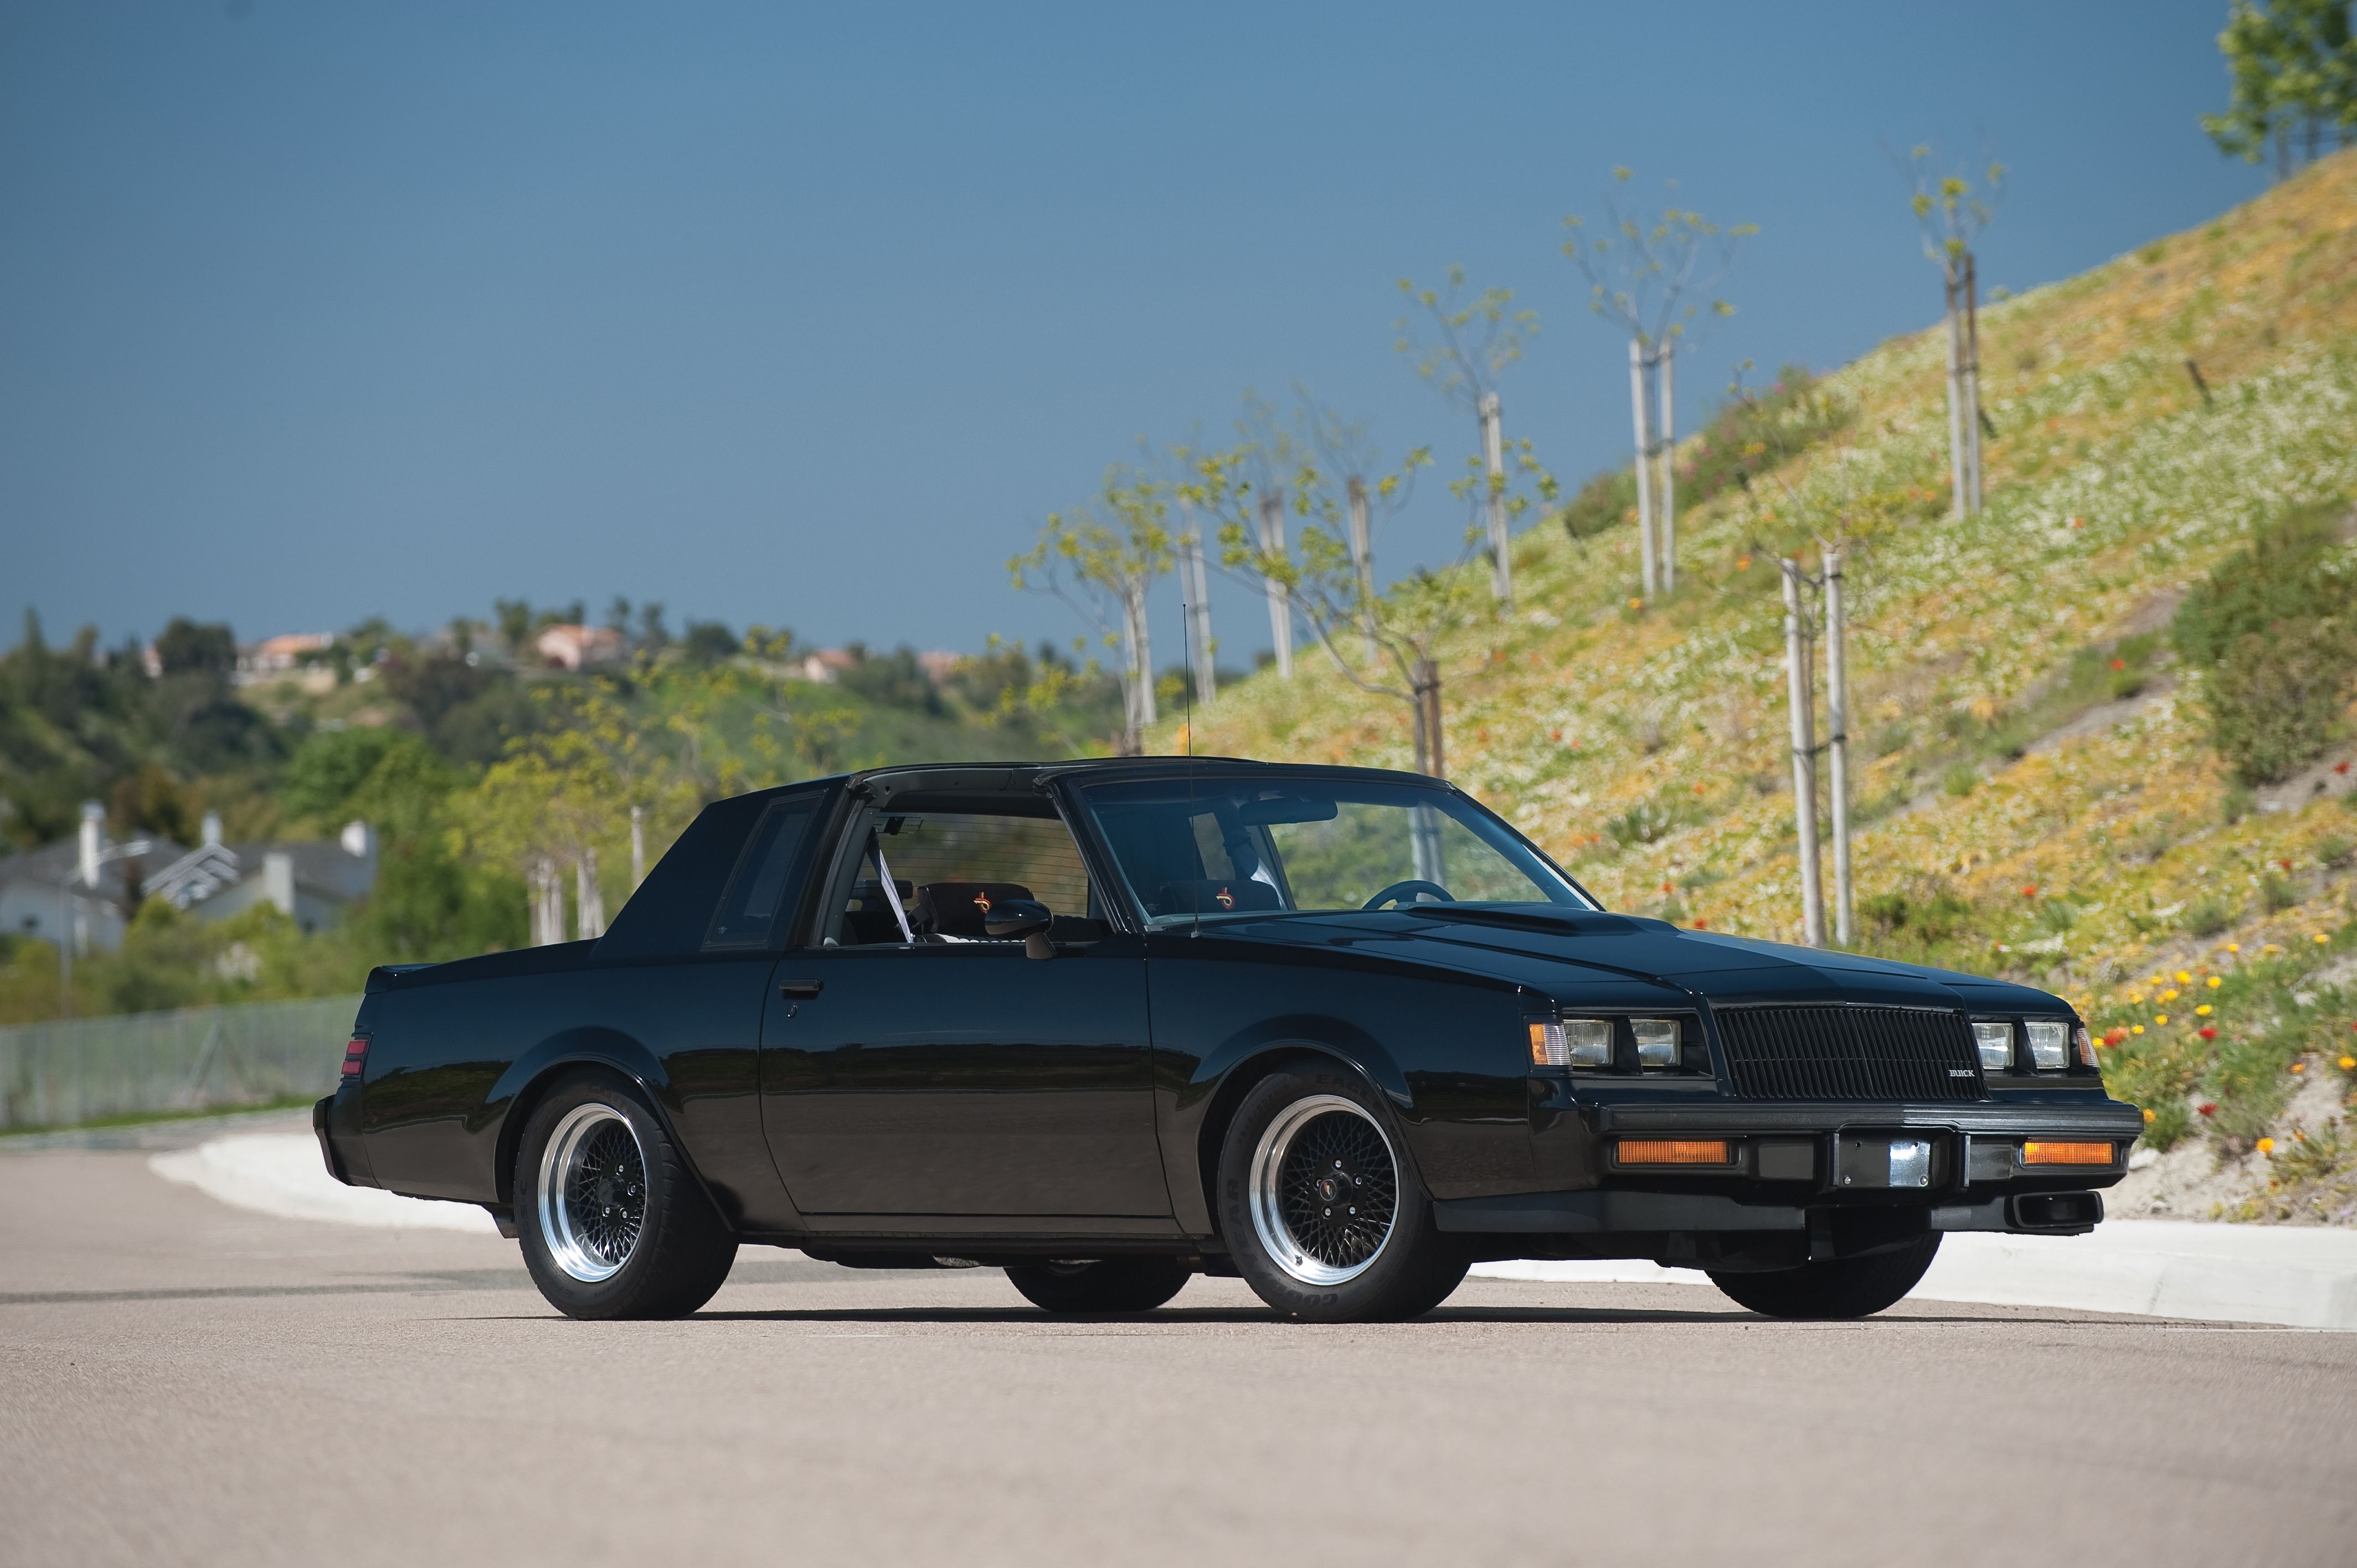 1987 Buick GNX on the road